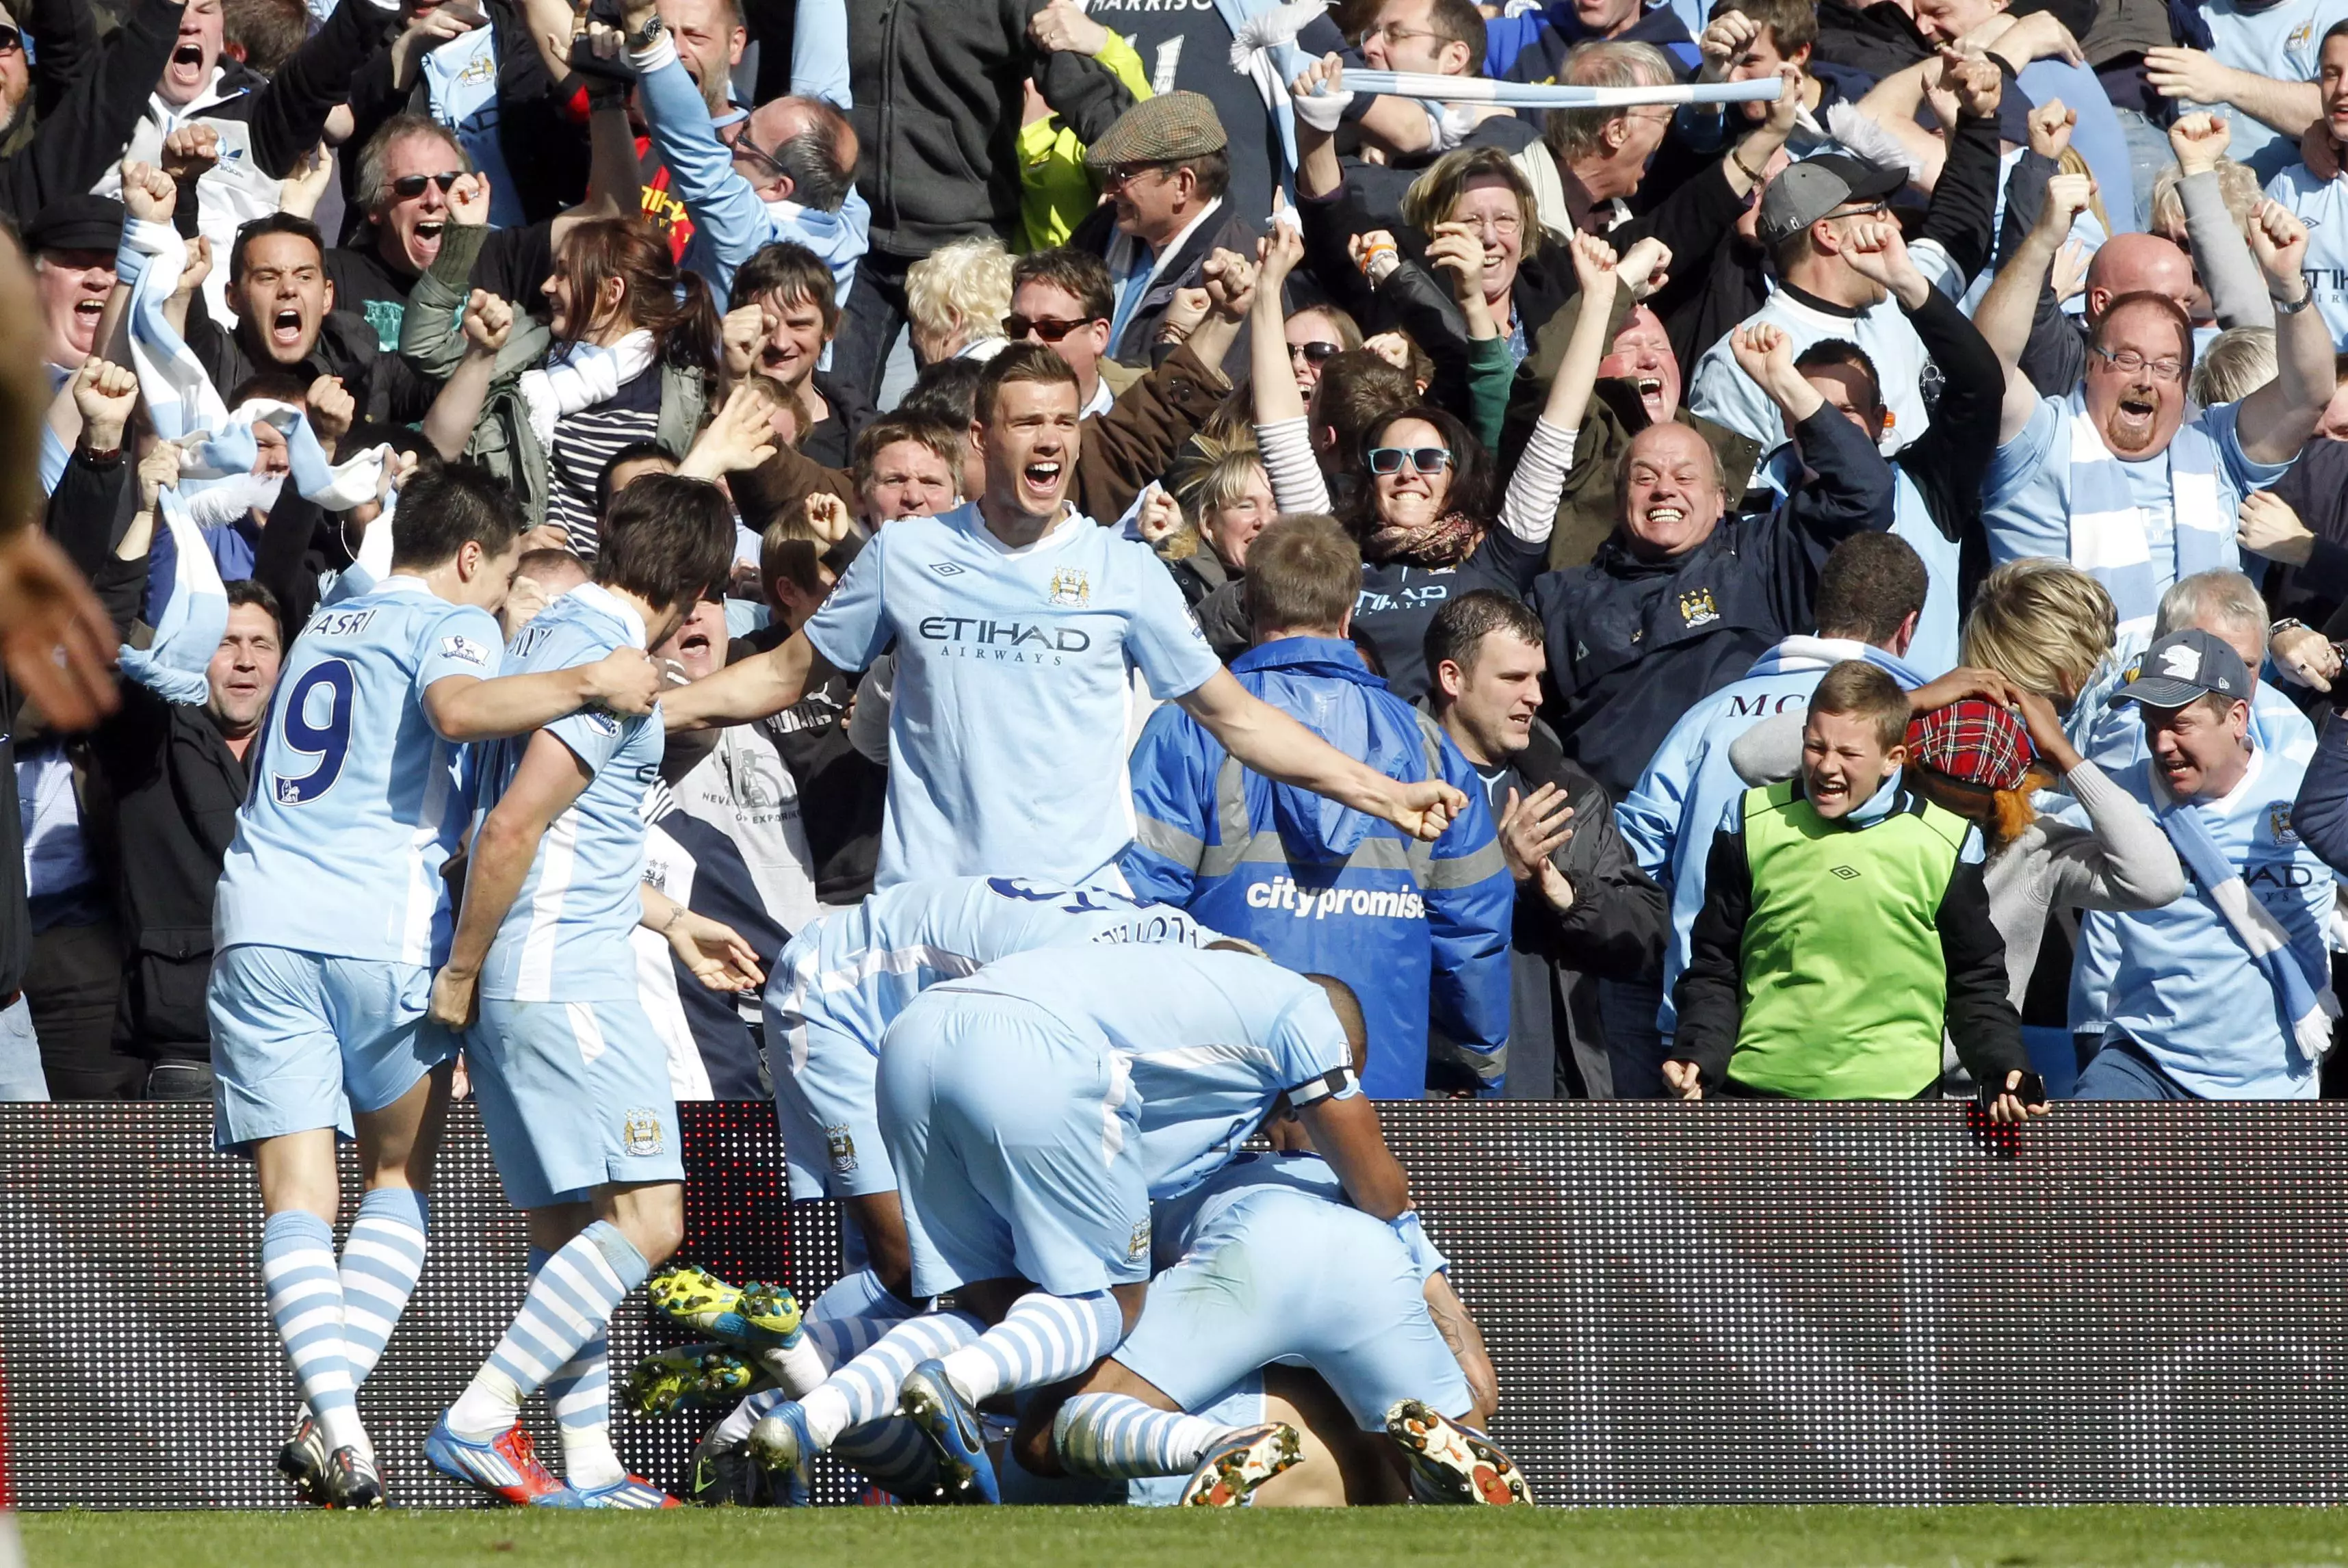 City players celebrate with Aguero. Image: PA Images